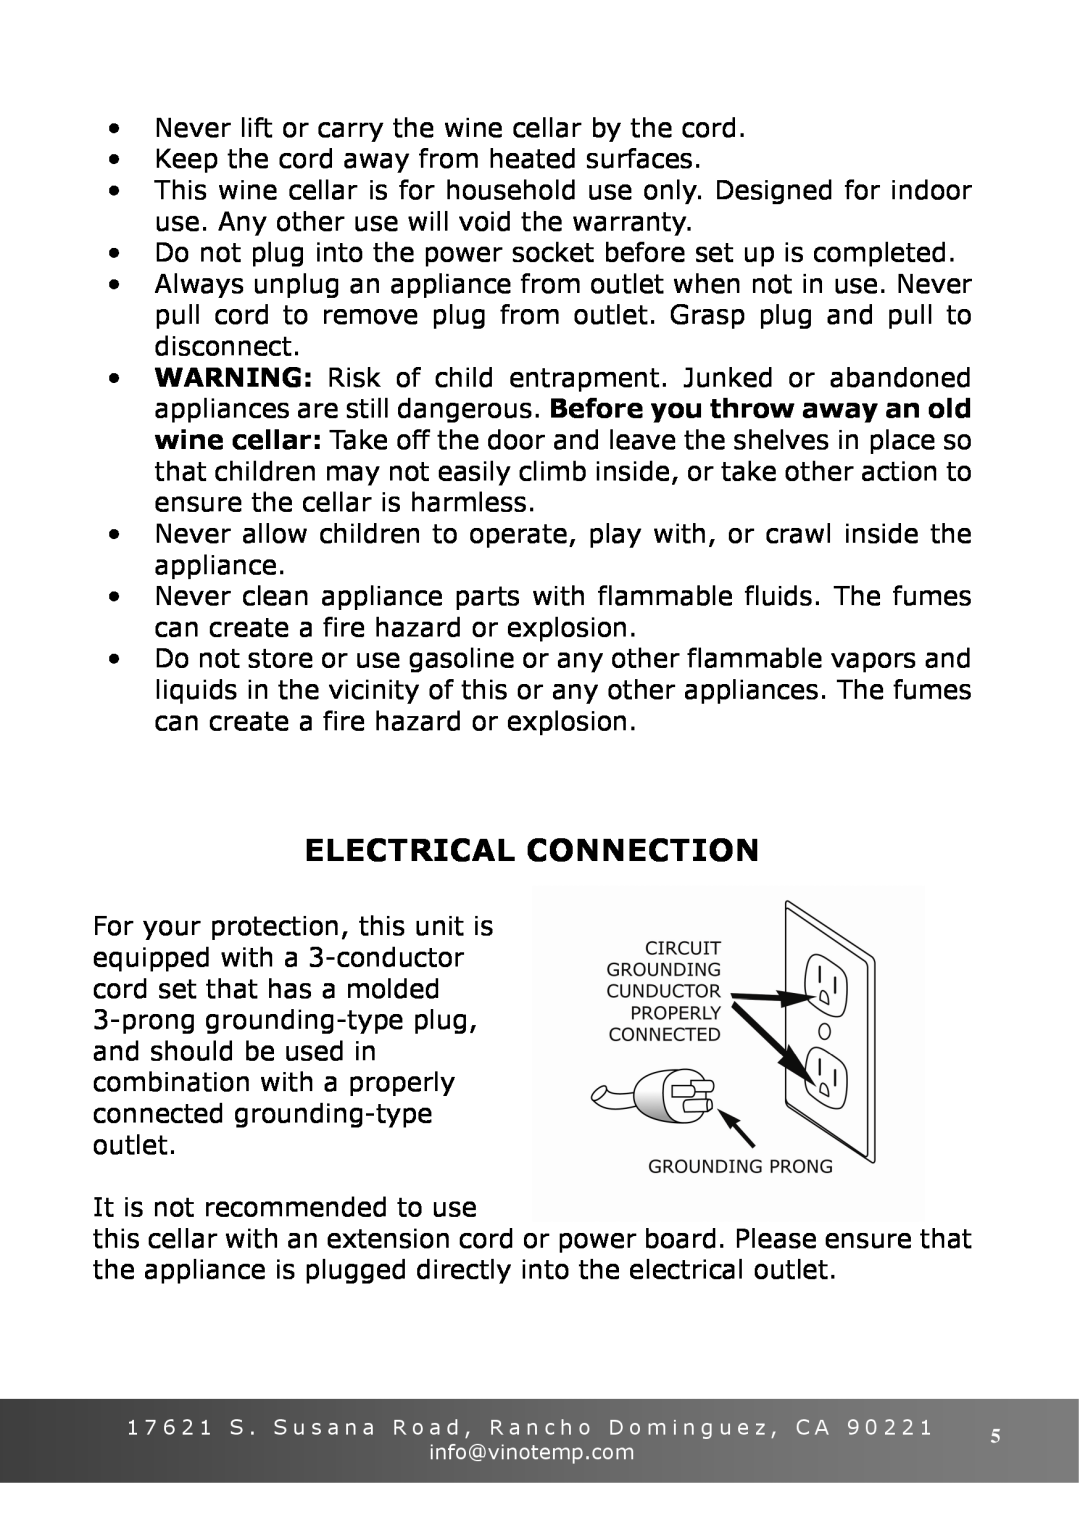 Vinotemp VT-6TEDS owner manual Electrical Connection 